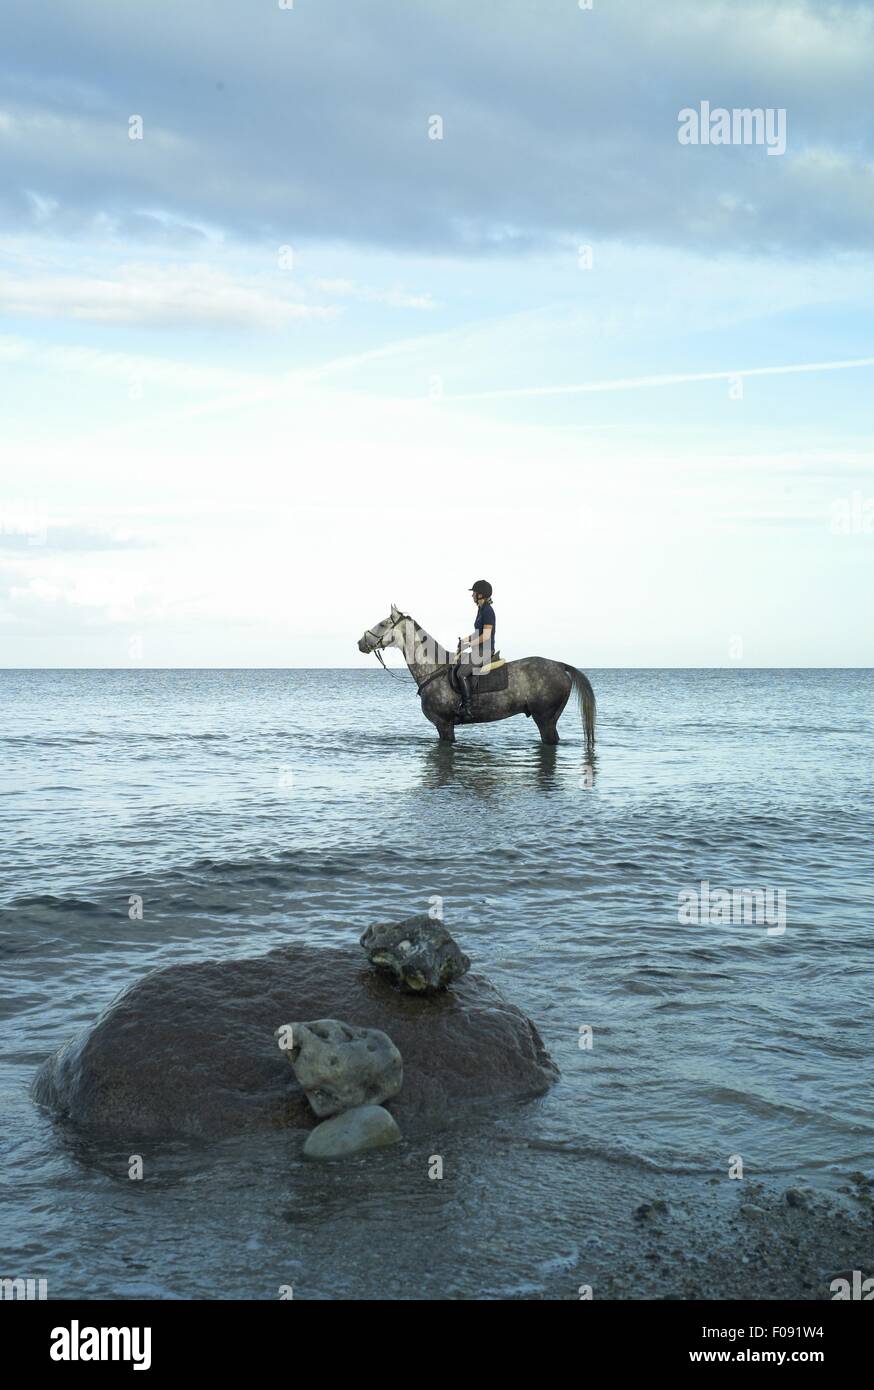 Rider on horse in the water at Baltic Sea Coast, Fehmarn, Ostholstein, Germany Stock Photo